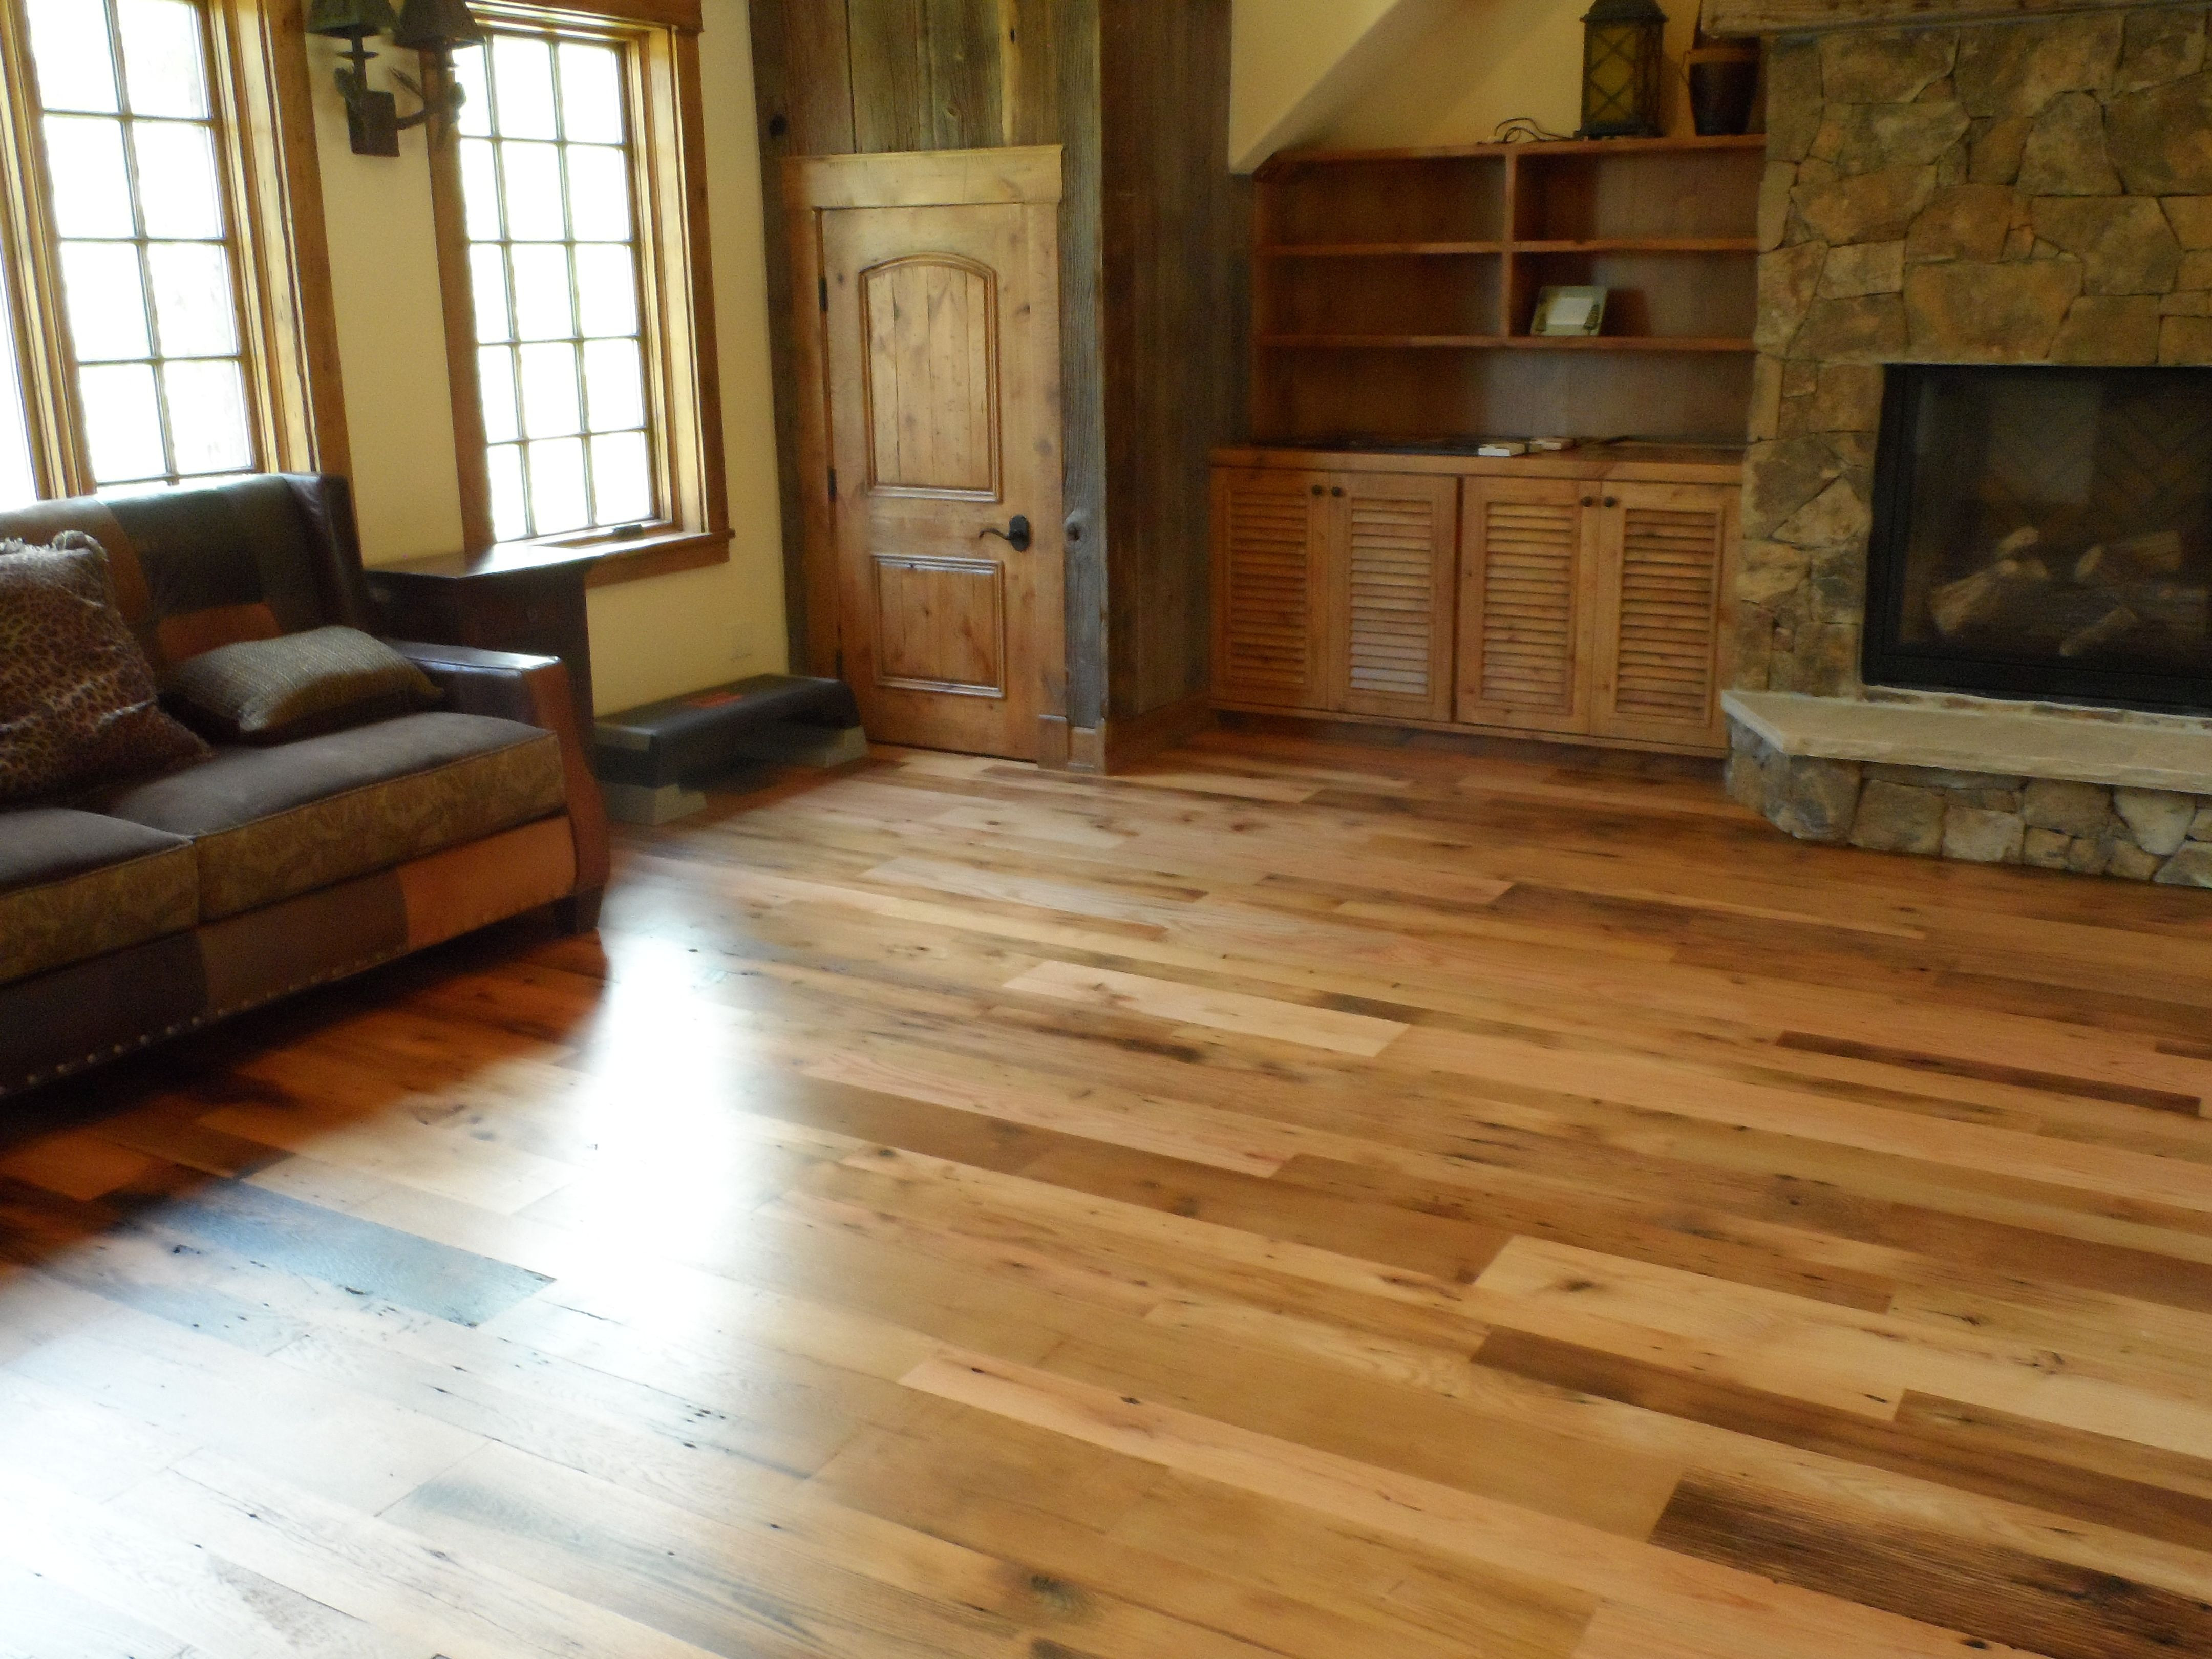 14 Best Hardwood Floor Transition Ideas 2024 free download hardwood floor transition ideas of flooring near me floor plan ideas in flooring near me custom hardwood floors trim and cabinets done by timberline framers